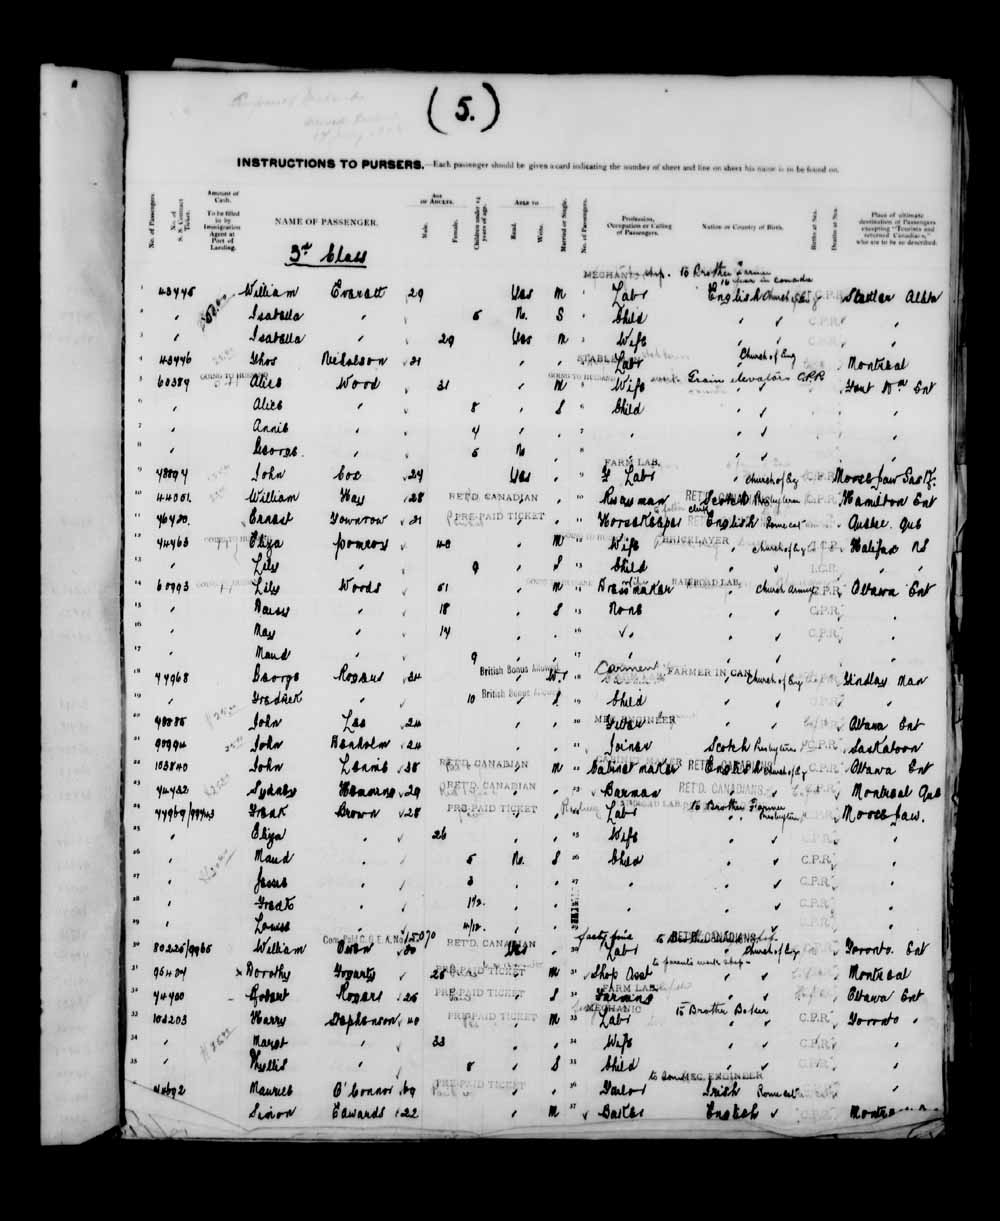 Digitized page of Quebec Passenger Lists for Image No.: e003591255